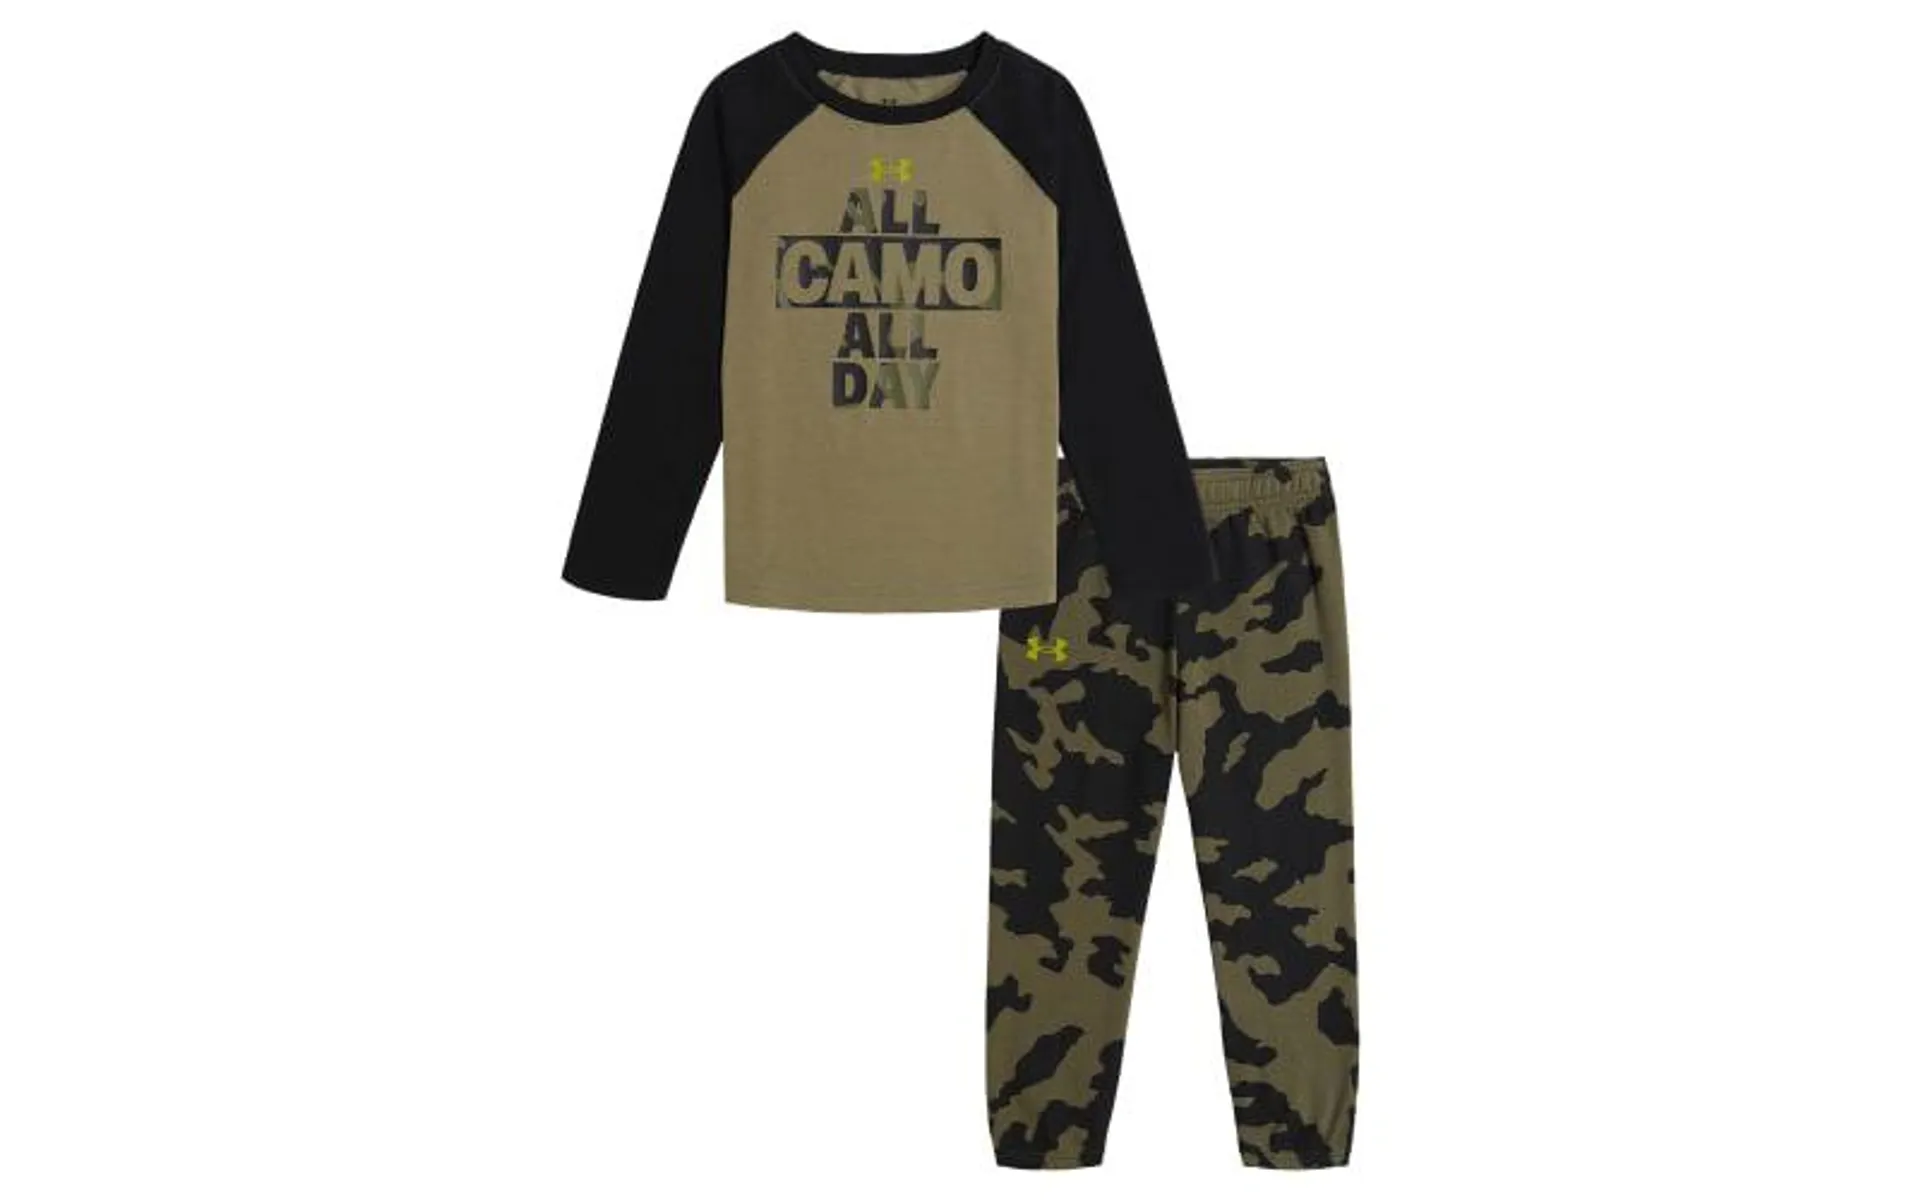 Under Armour All Camo All Day Raglan Long-Sleeve T-Shirt and Fleece Pants Set for Toddlers or Kids